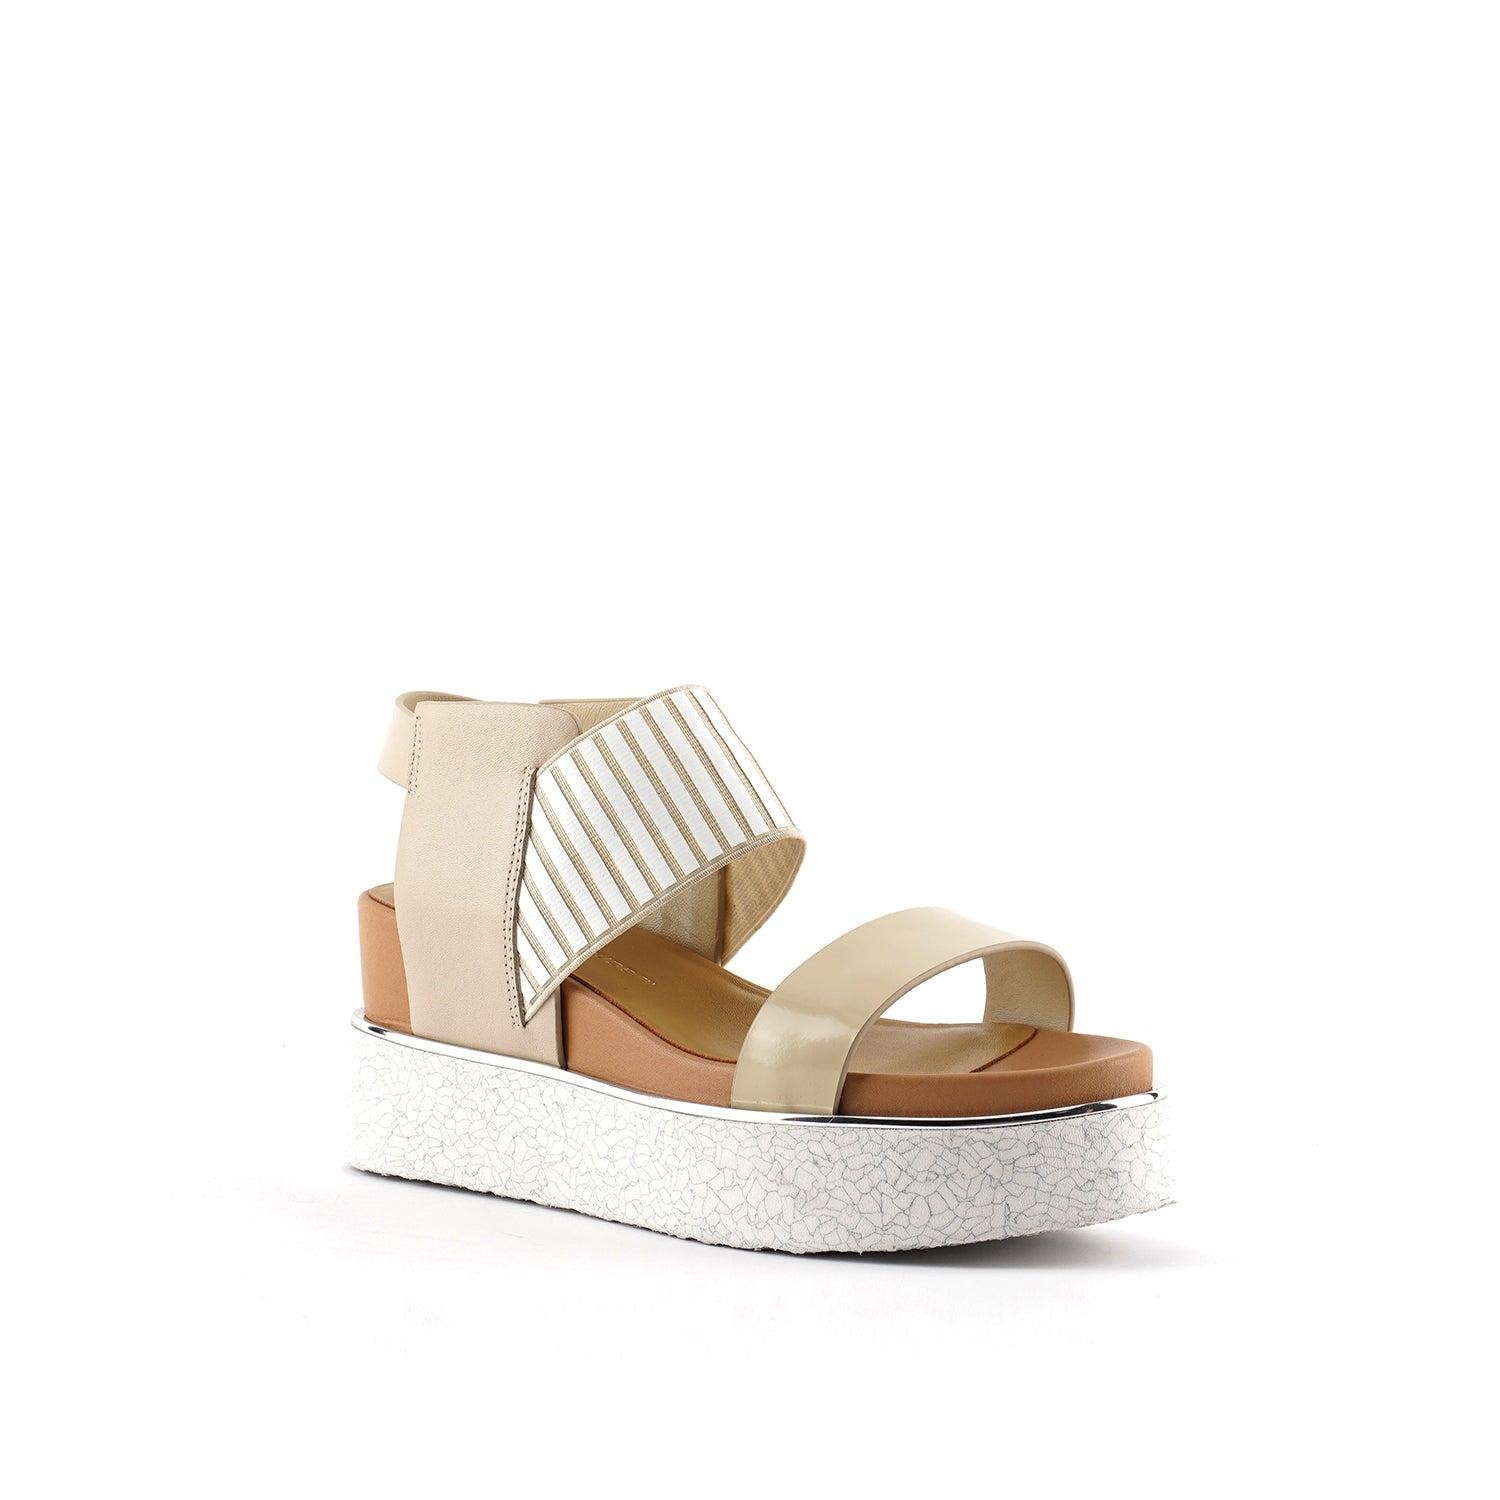 United Nude Rico Sandal in Natural | Lyst